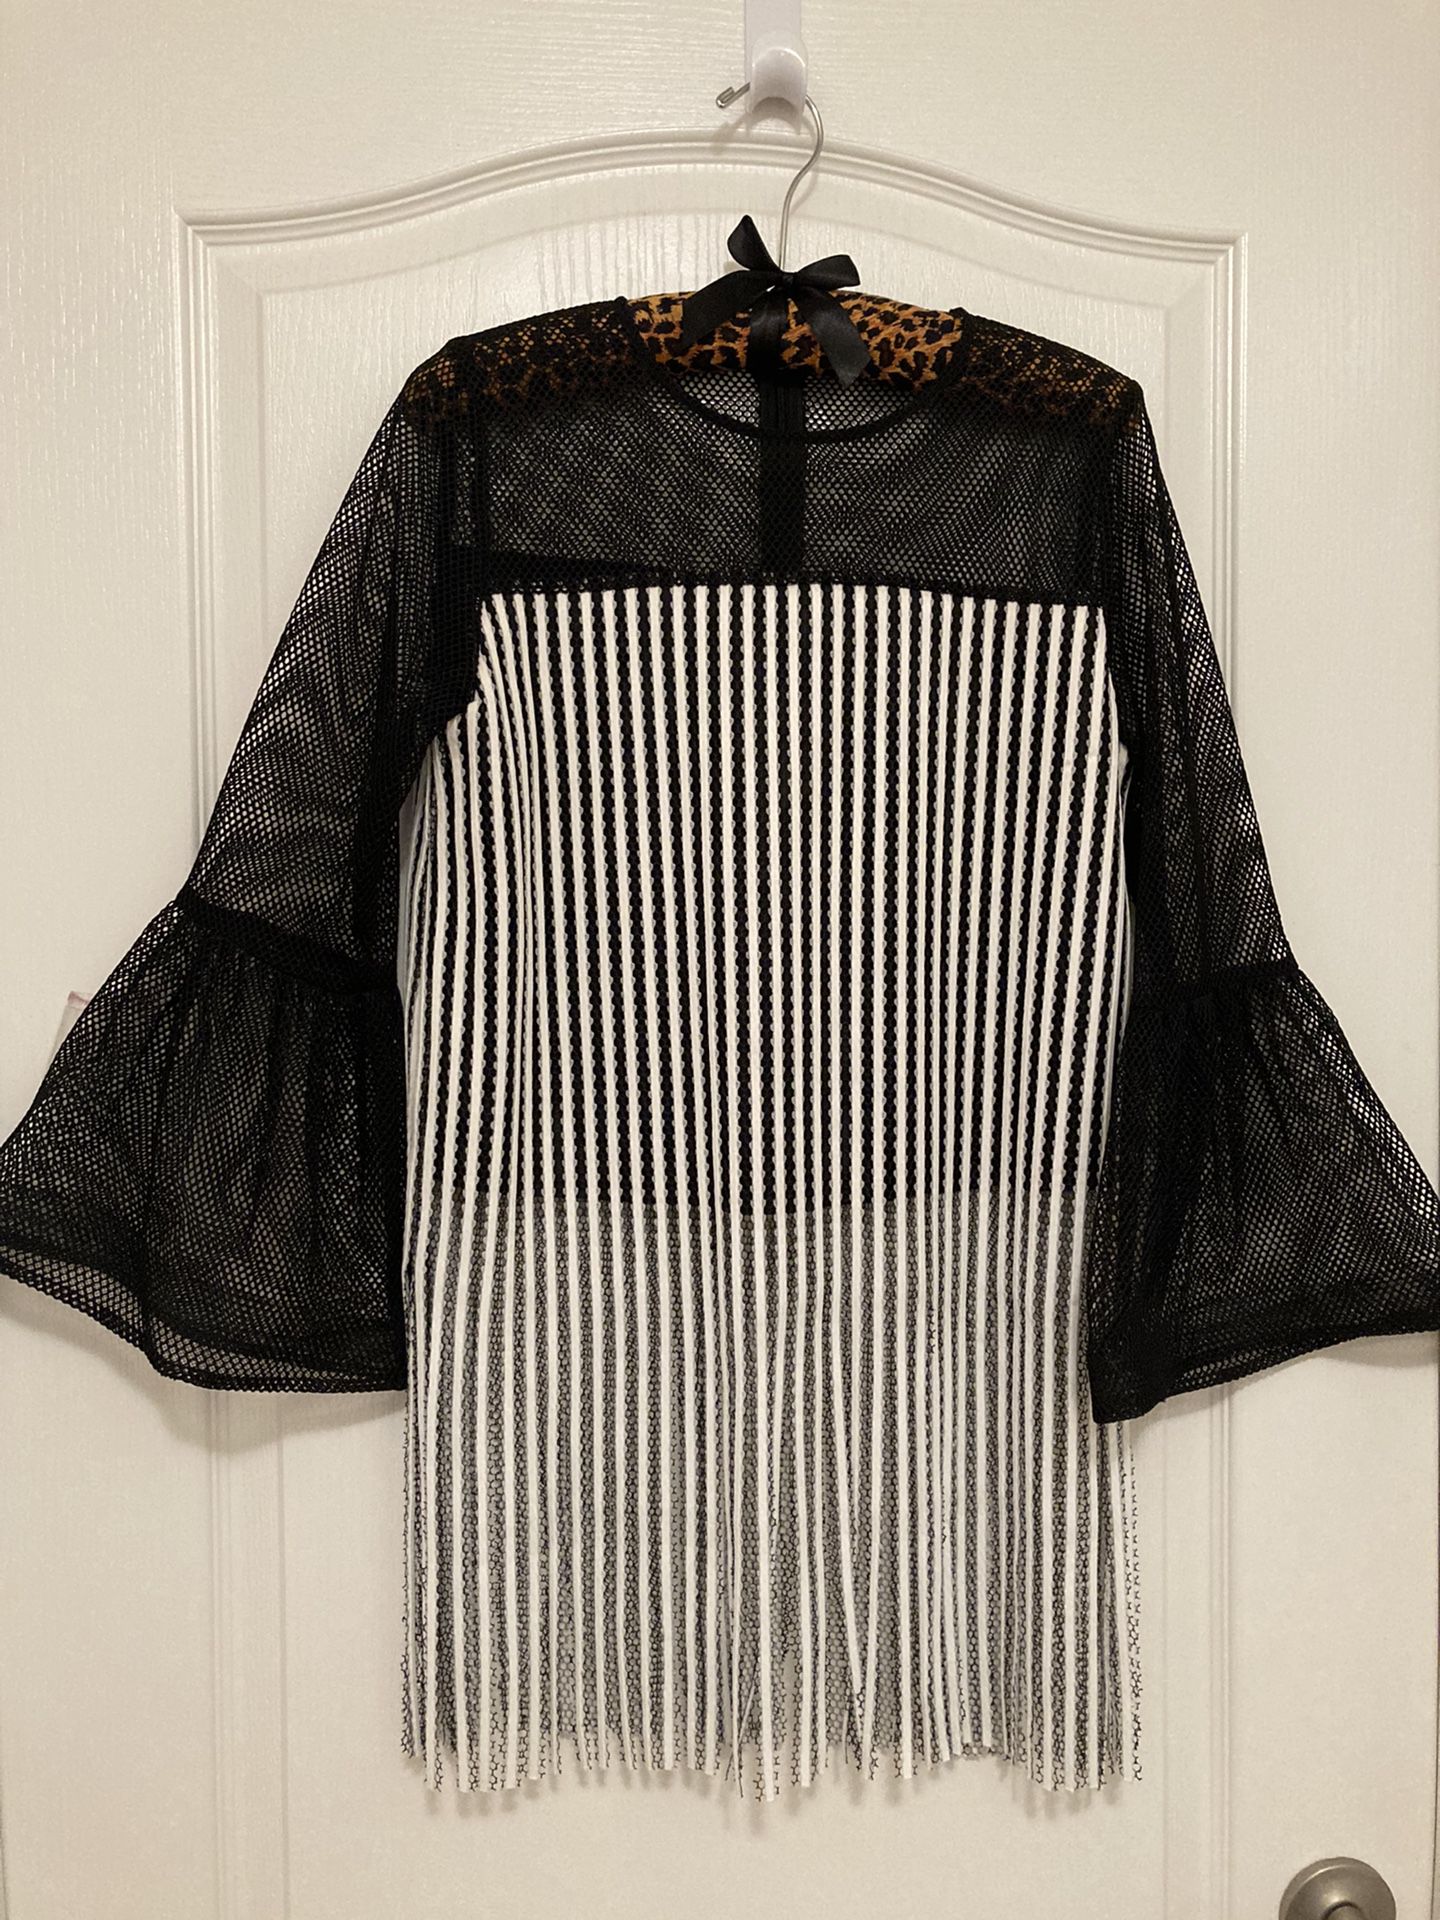 Top  Fringe And Mesh Black& White Textured Stripes Lined With Black Polyester ! Super Cute Mesh Bell Sleeves And Fringe Top New